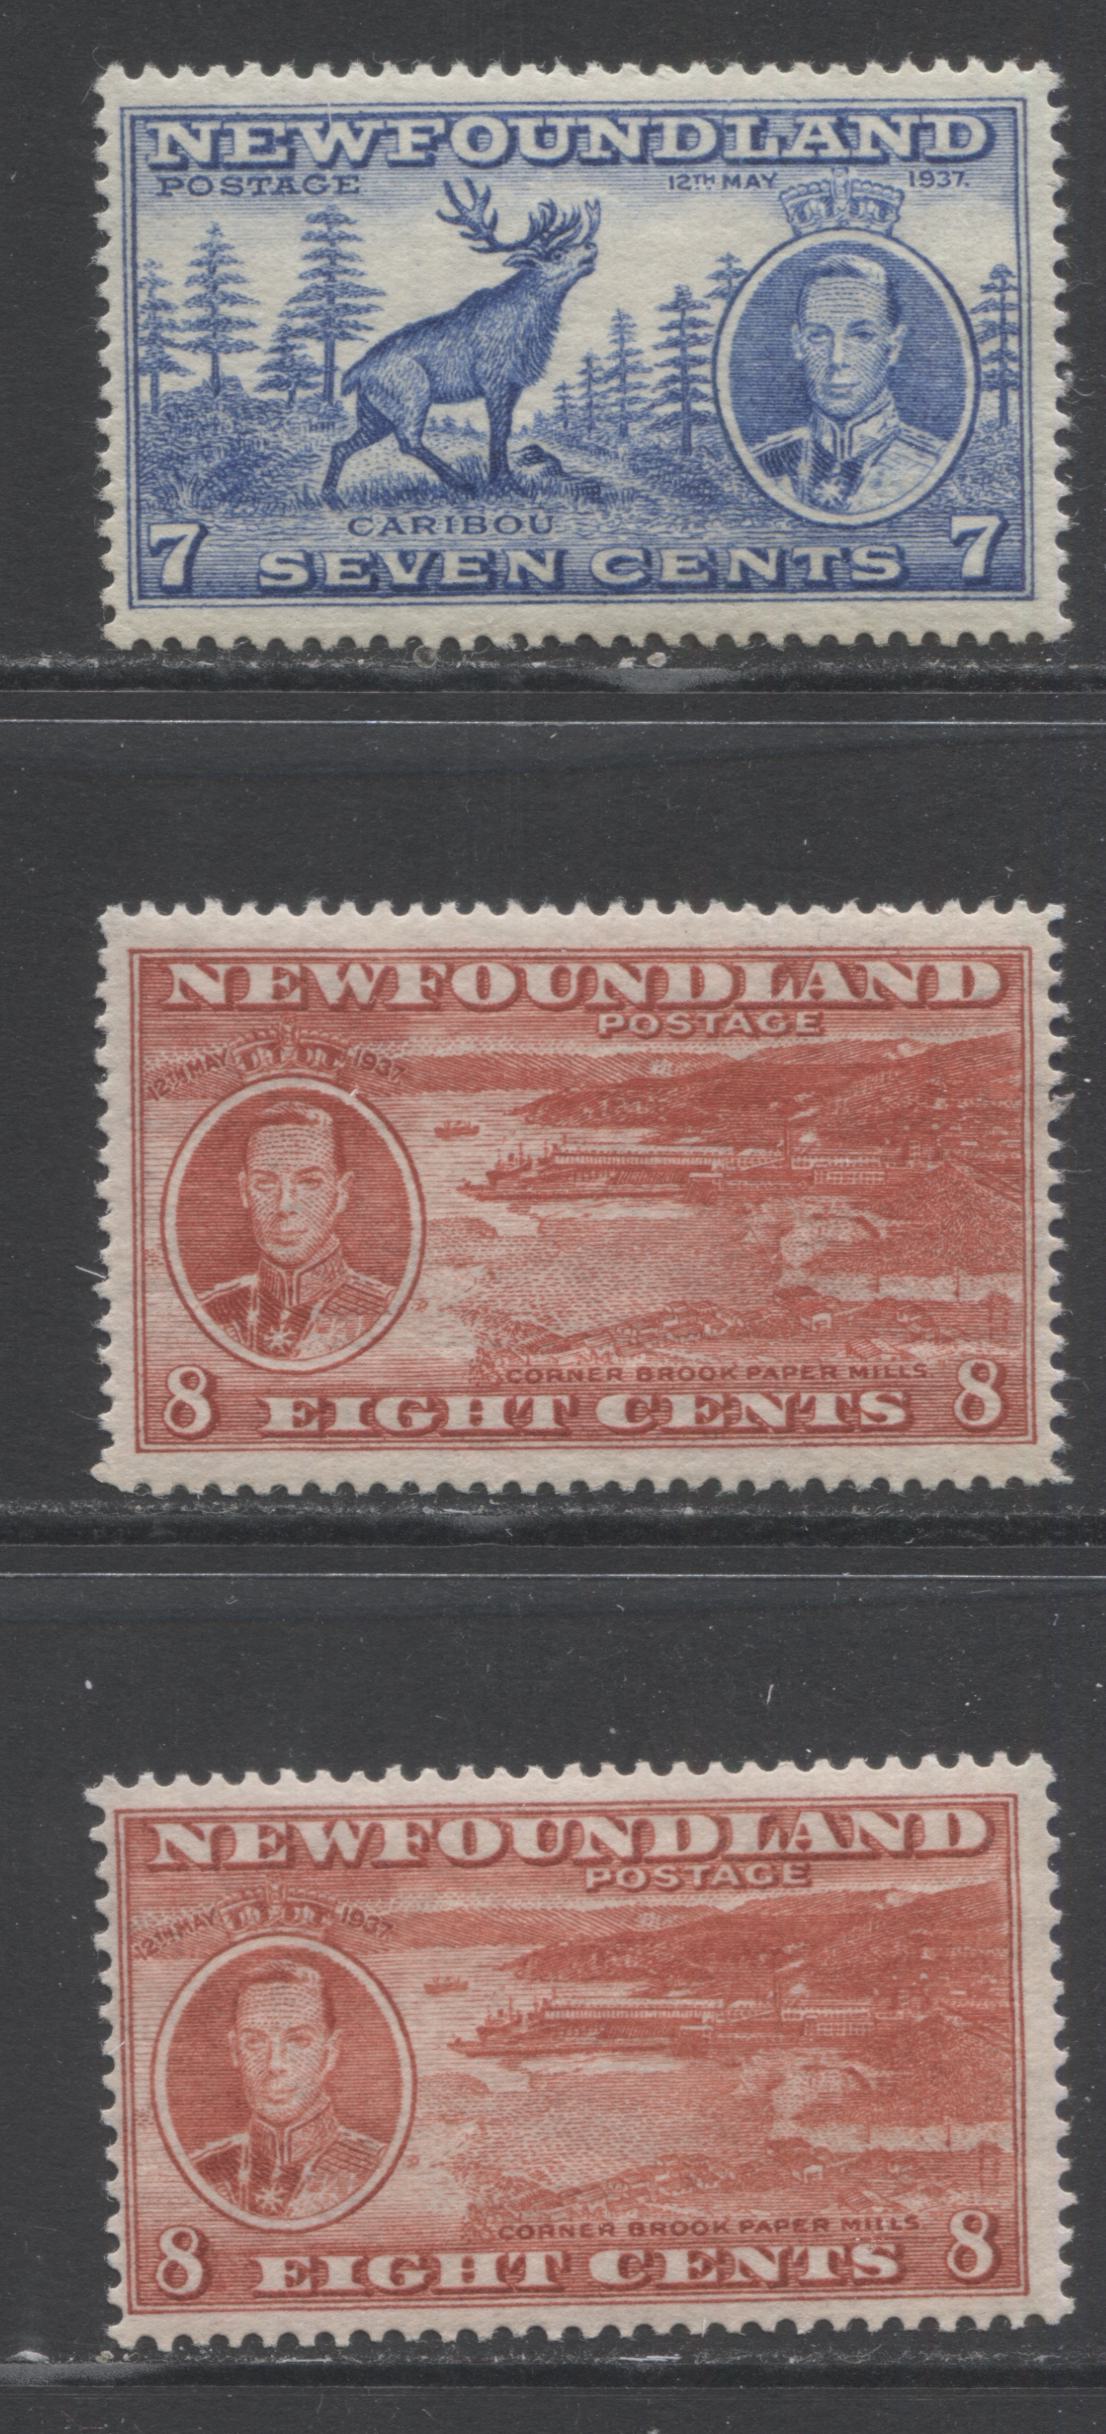 Lot 339 Newfoundland #235, 236, 236d 7c & 8c Bright Ultramarine & Scarlet Caribou & Corner Brook Paper Mill, 1937 Long Coronation Issue, 3 Fine NH and VFNH Singles Showing Different Perfs